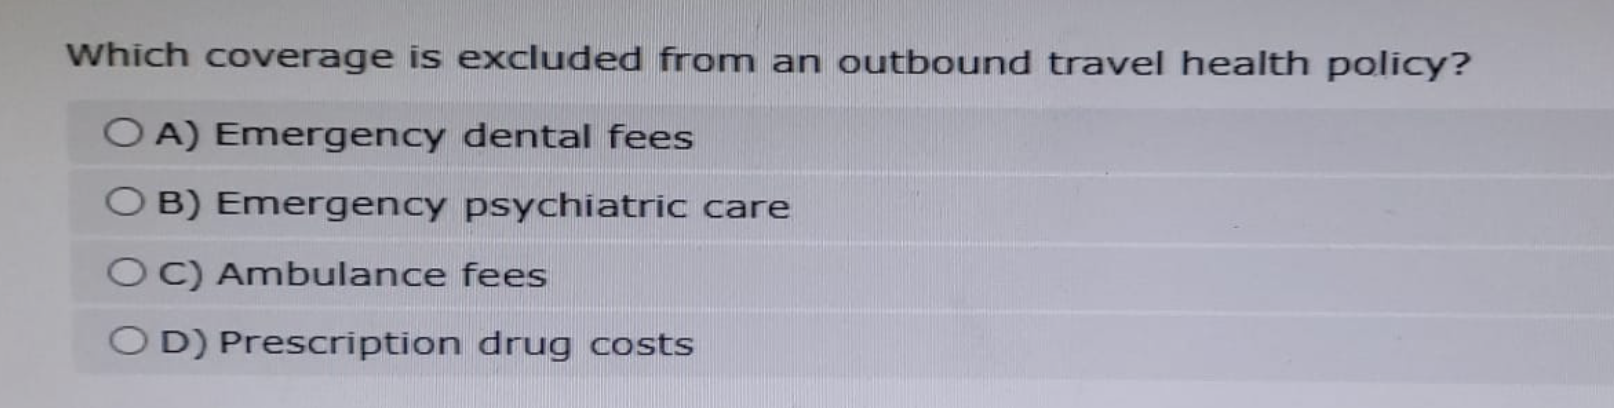 Which coverage is excluded from an outbound travel health policy?
OA) Emergency dental fees
O B) Emergency psychiatric care
OC) Ambulance fees
OD) Prescription drug costs